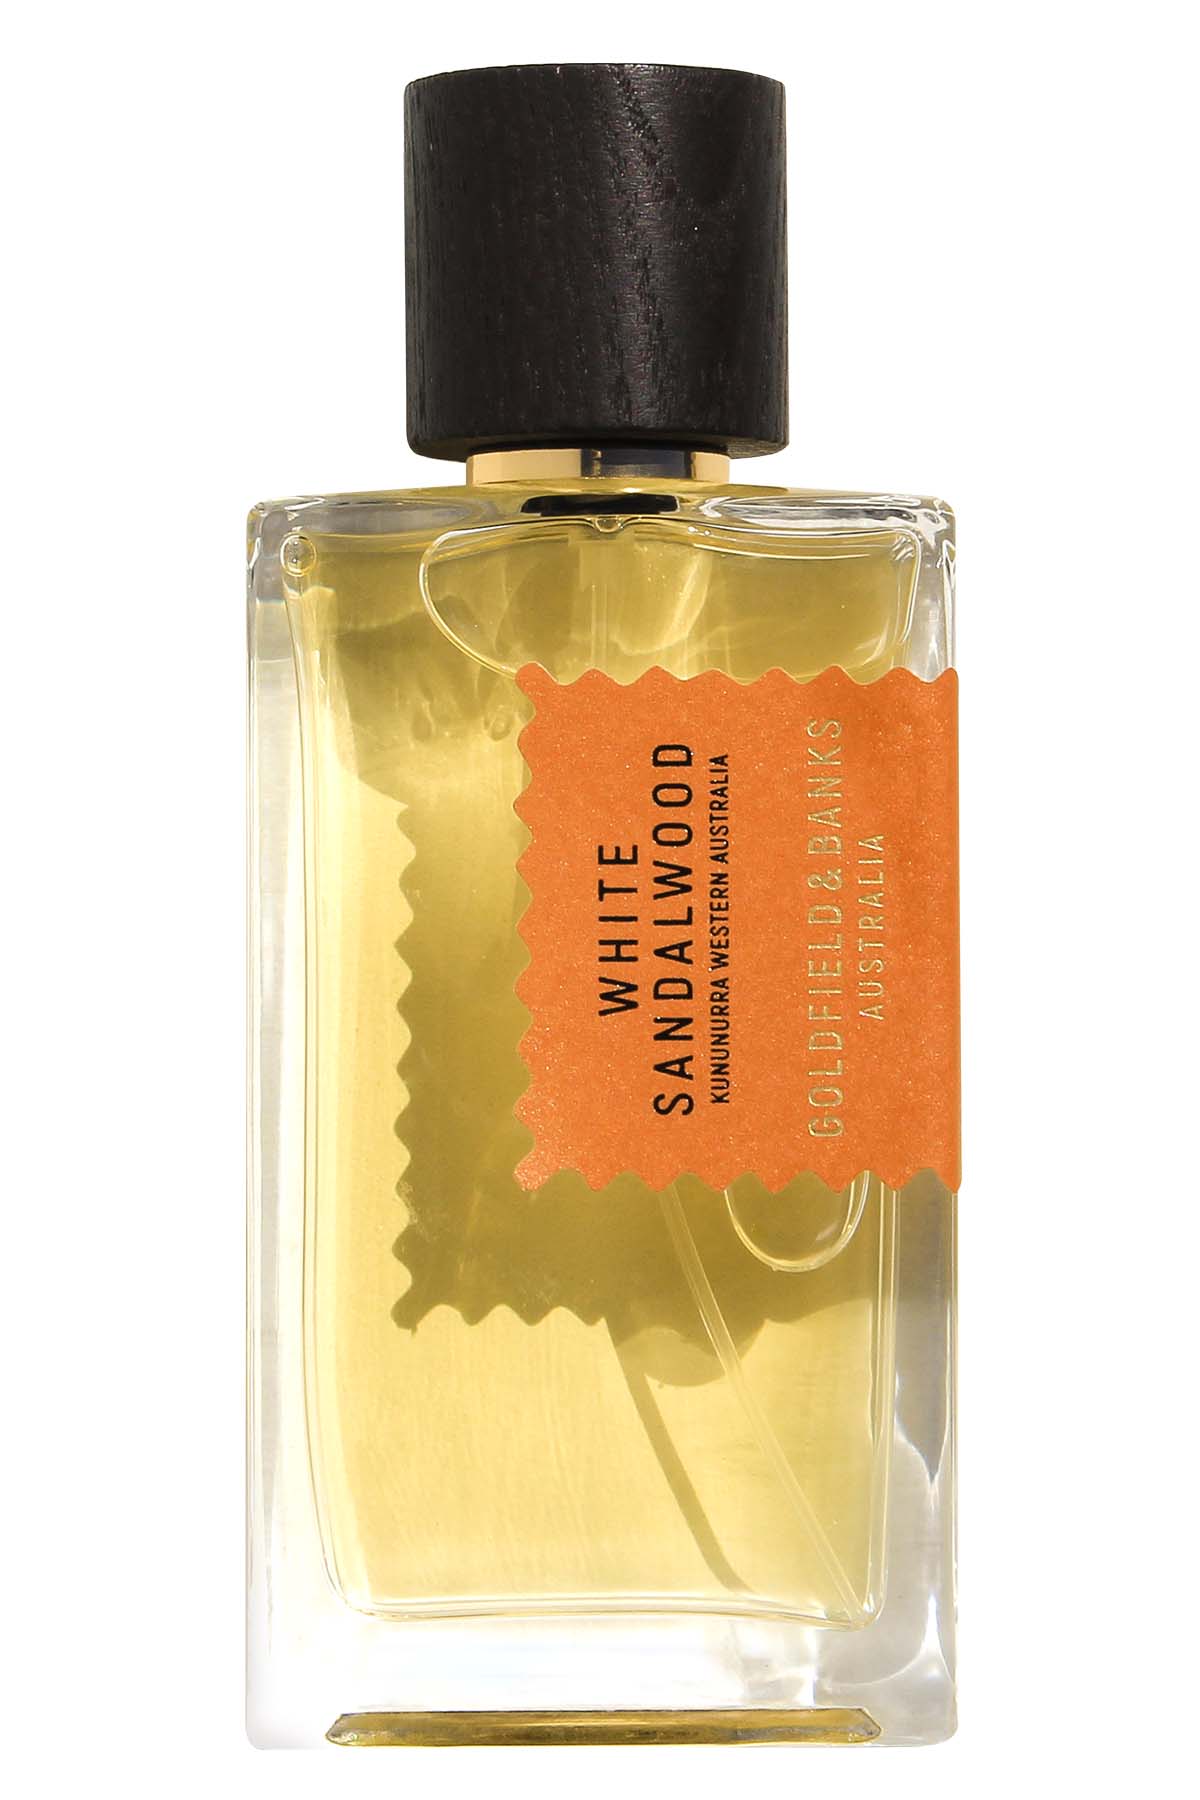 Goldfield & Banks White Sandalwood 100ml Perfume Concentrate